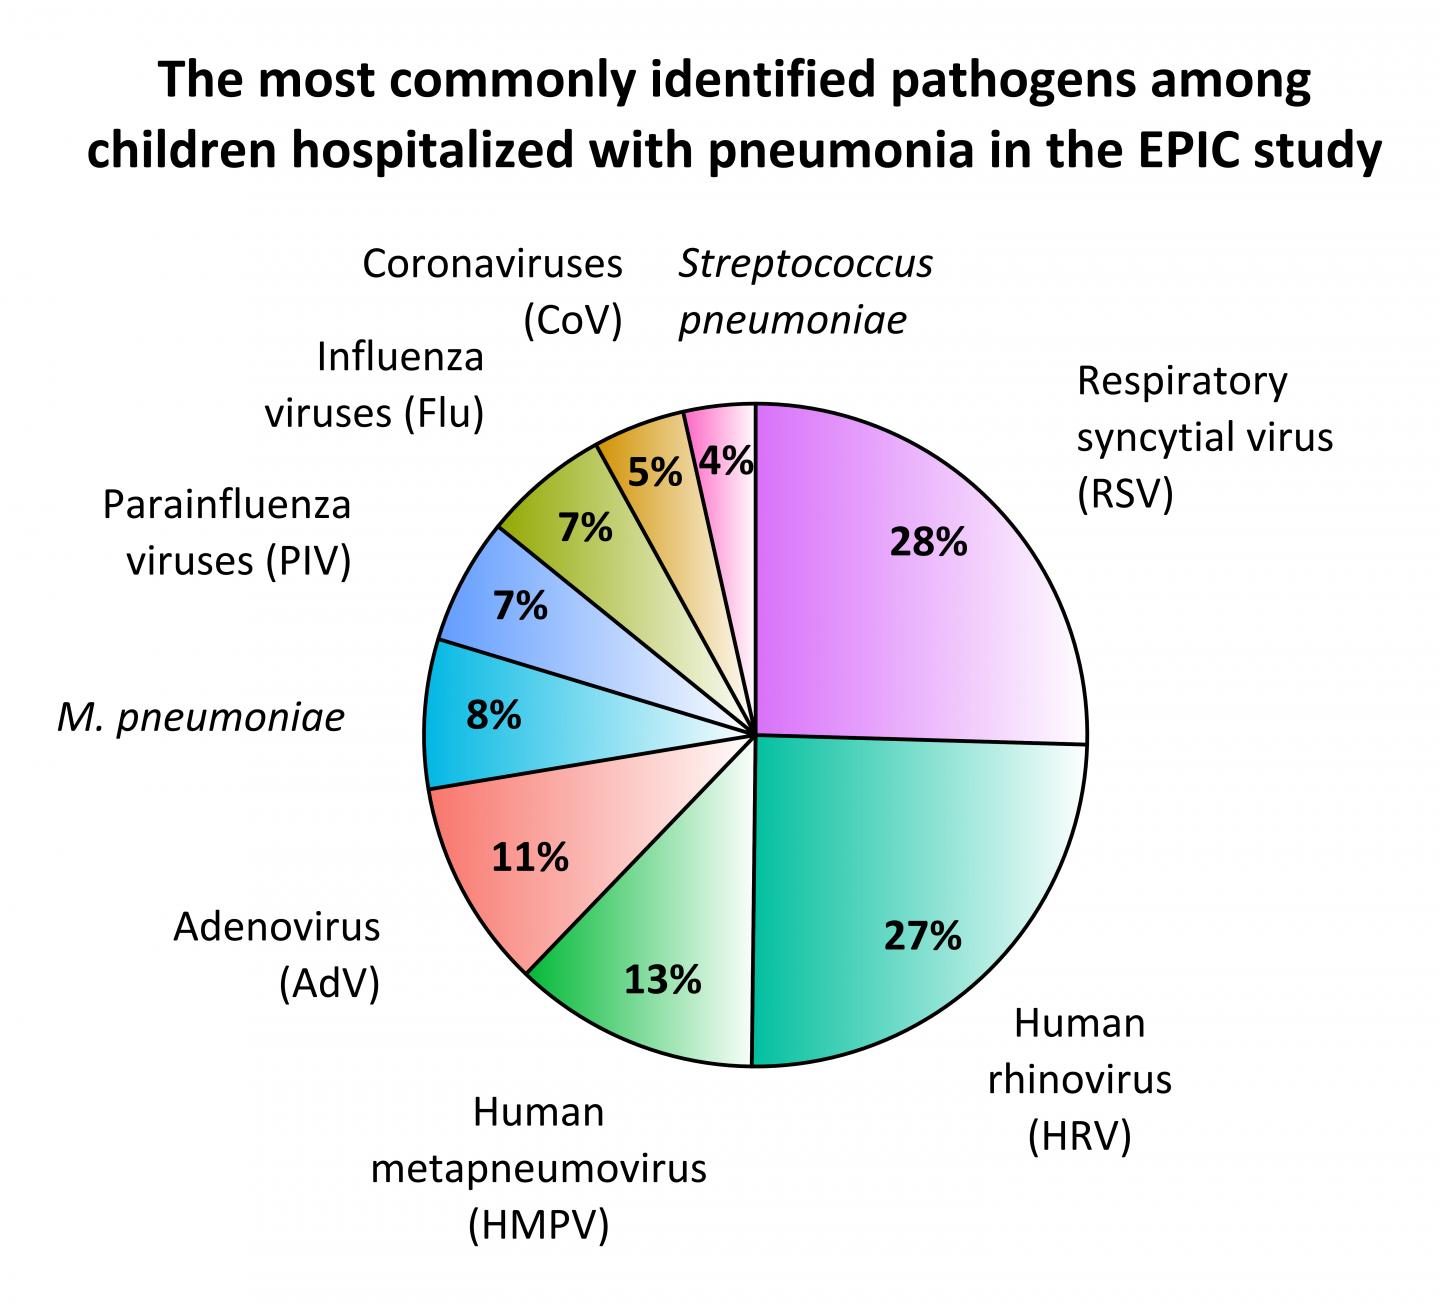 The Most Commonly Identified Pathogens among Children Hospitalized with Pneumonia